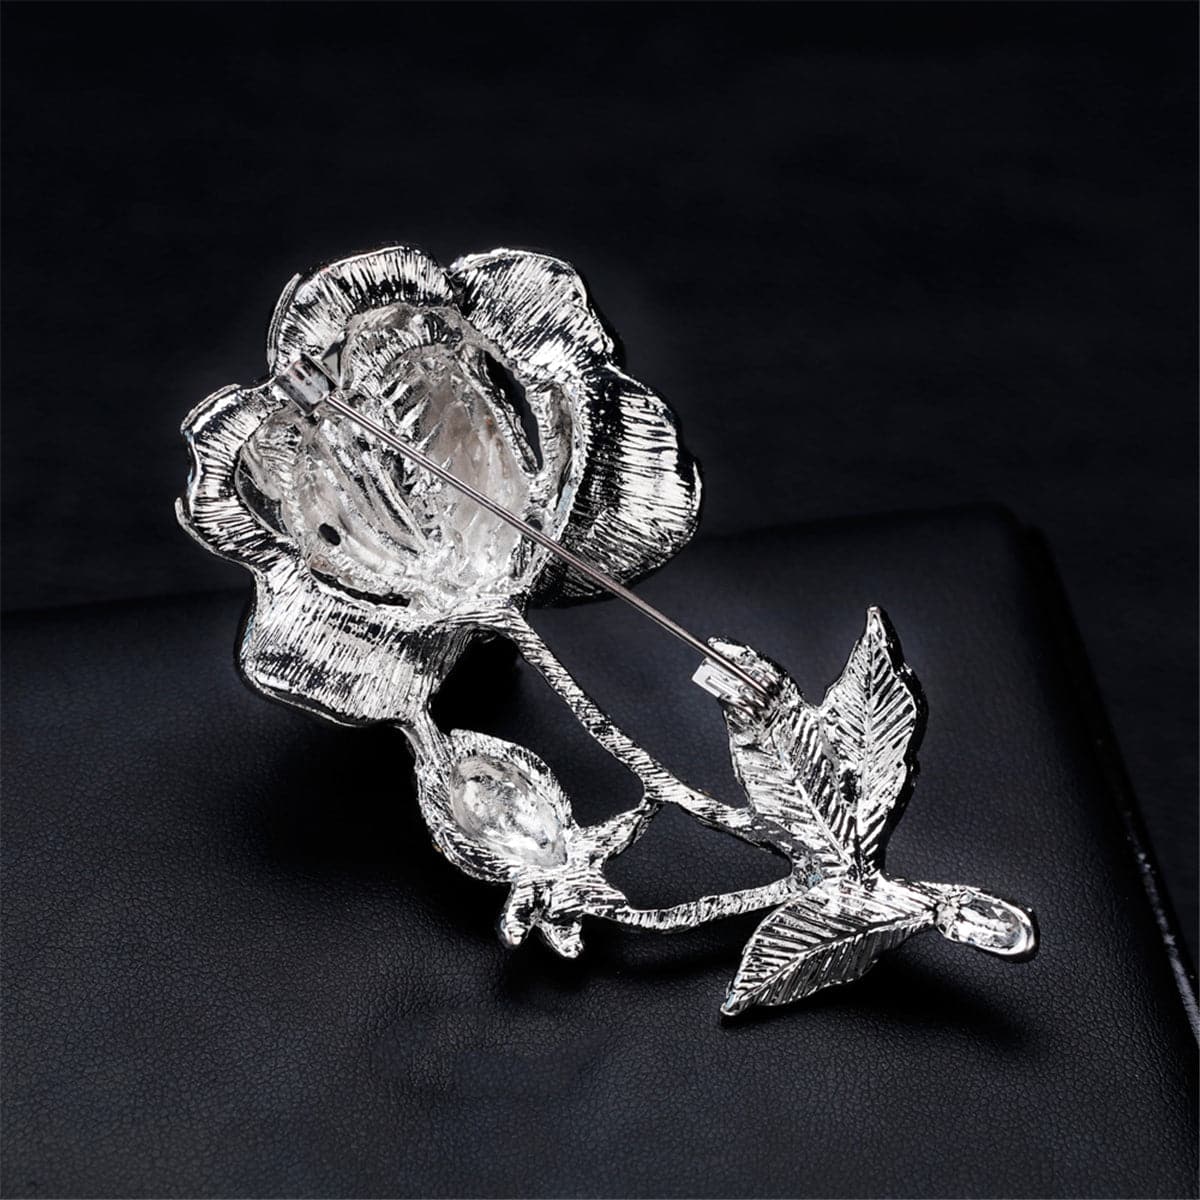 Cubic Zirconia & Pearl Silver-Plated Rose Brooch